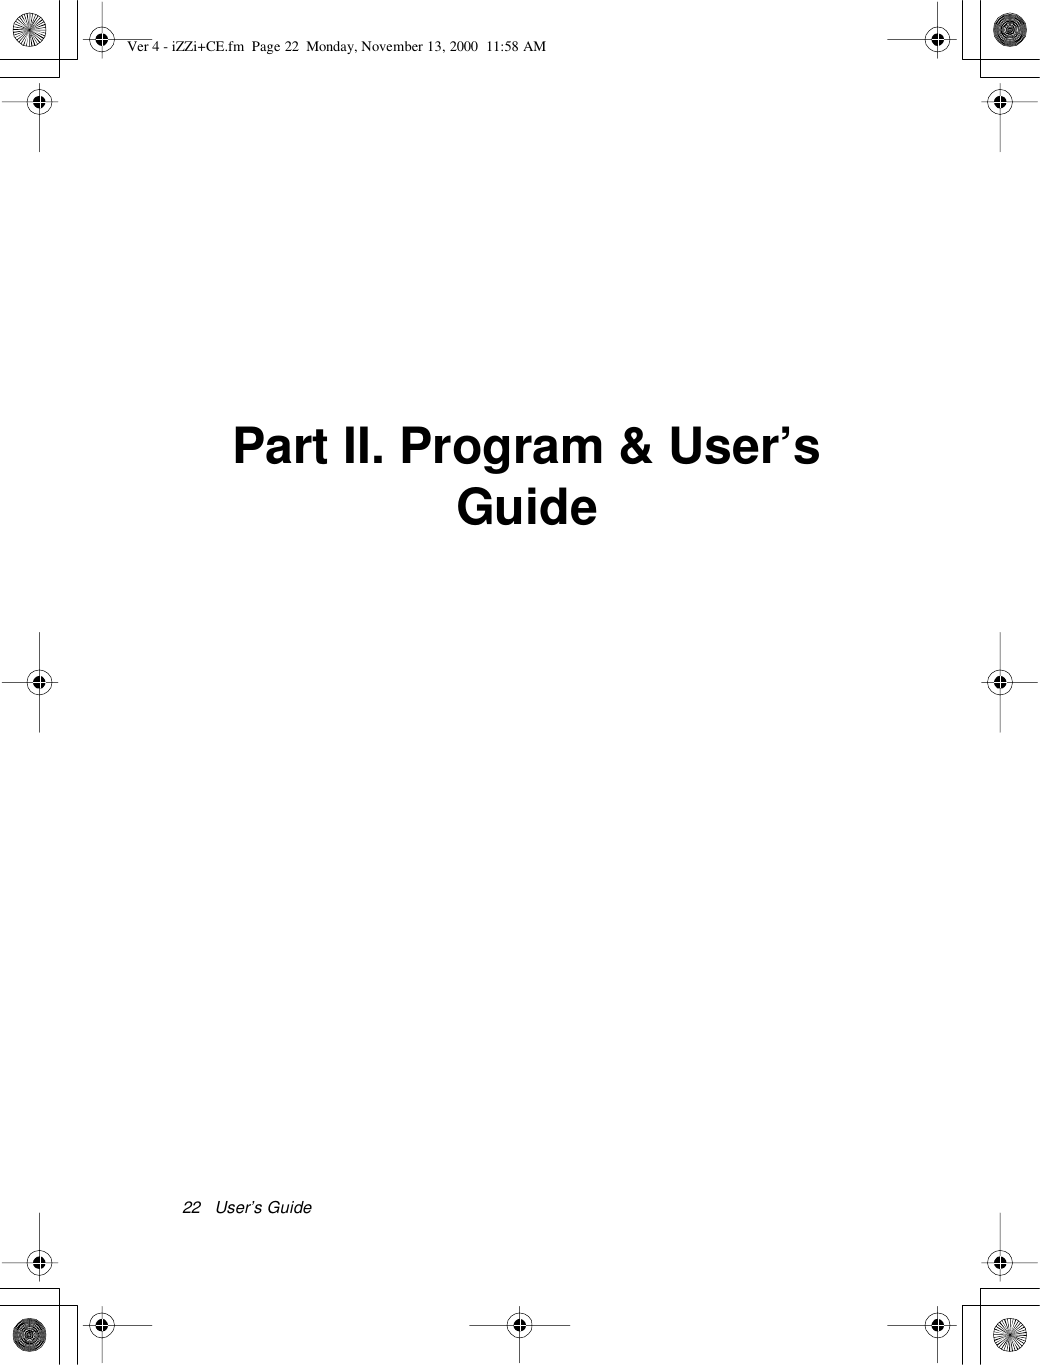 22 User’s GuidePart II. Program &amp;User’sGuideVer 4 - iZZi+CE.fm Page 22 Monday, November 13, 2000 11:58 AM